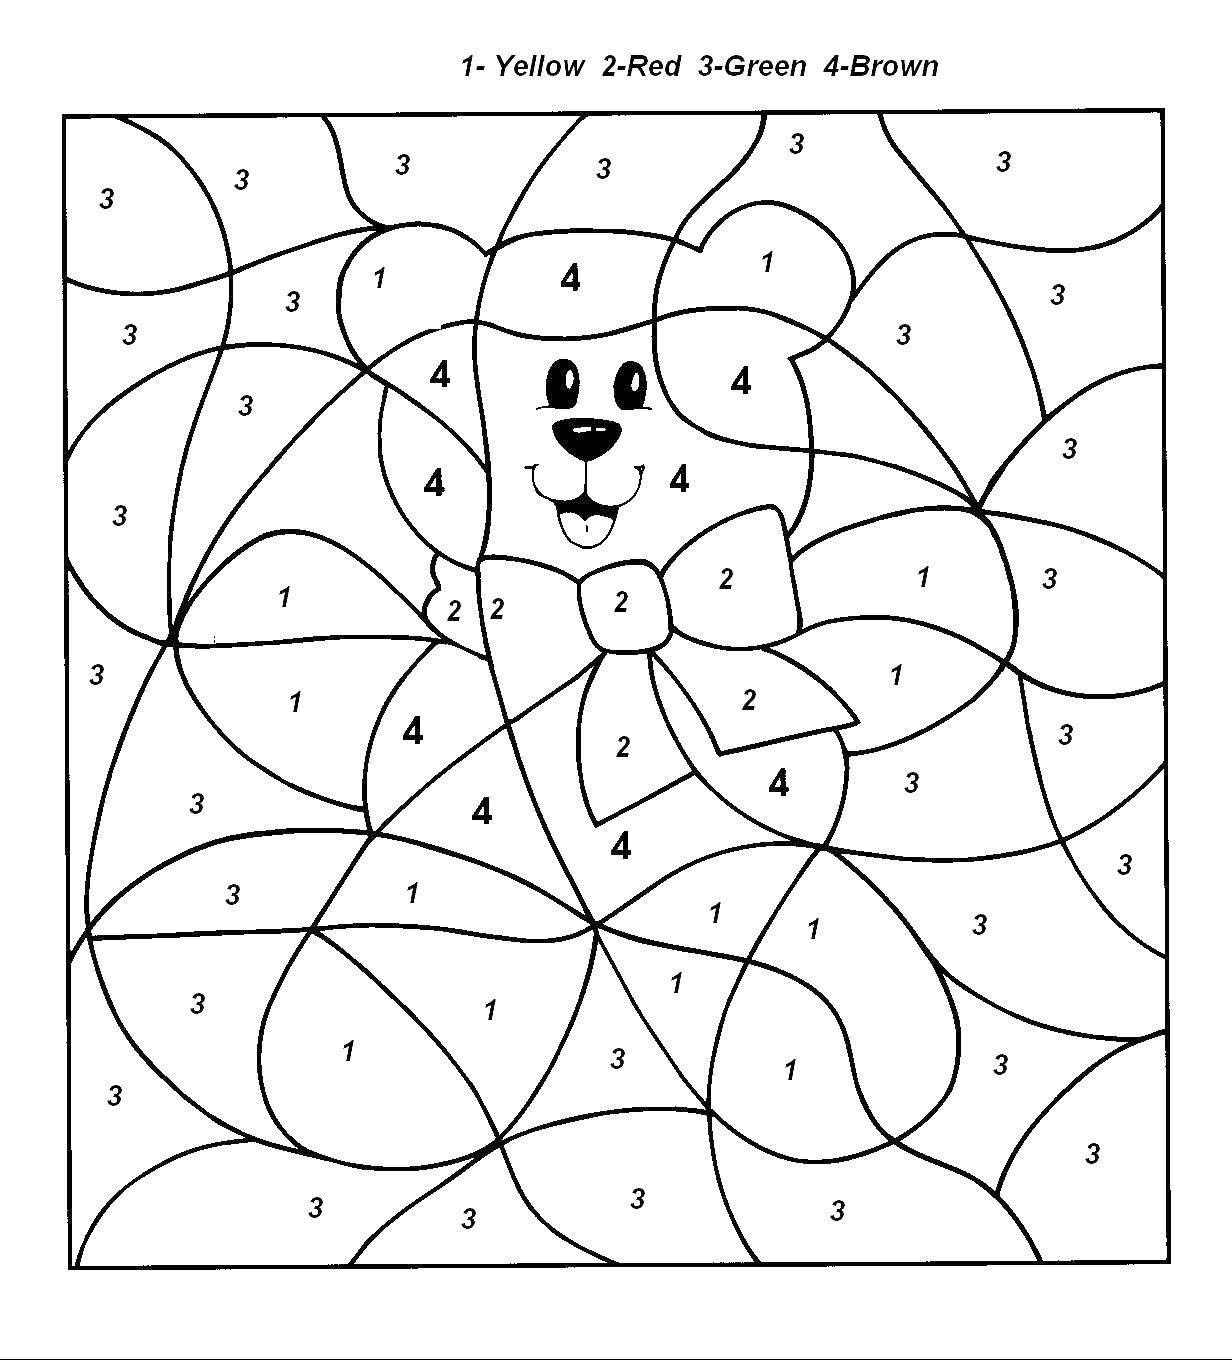 Coloring Bear colour by numbers. Category That number. Tags:  color by numbers, bear.